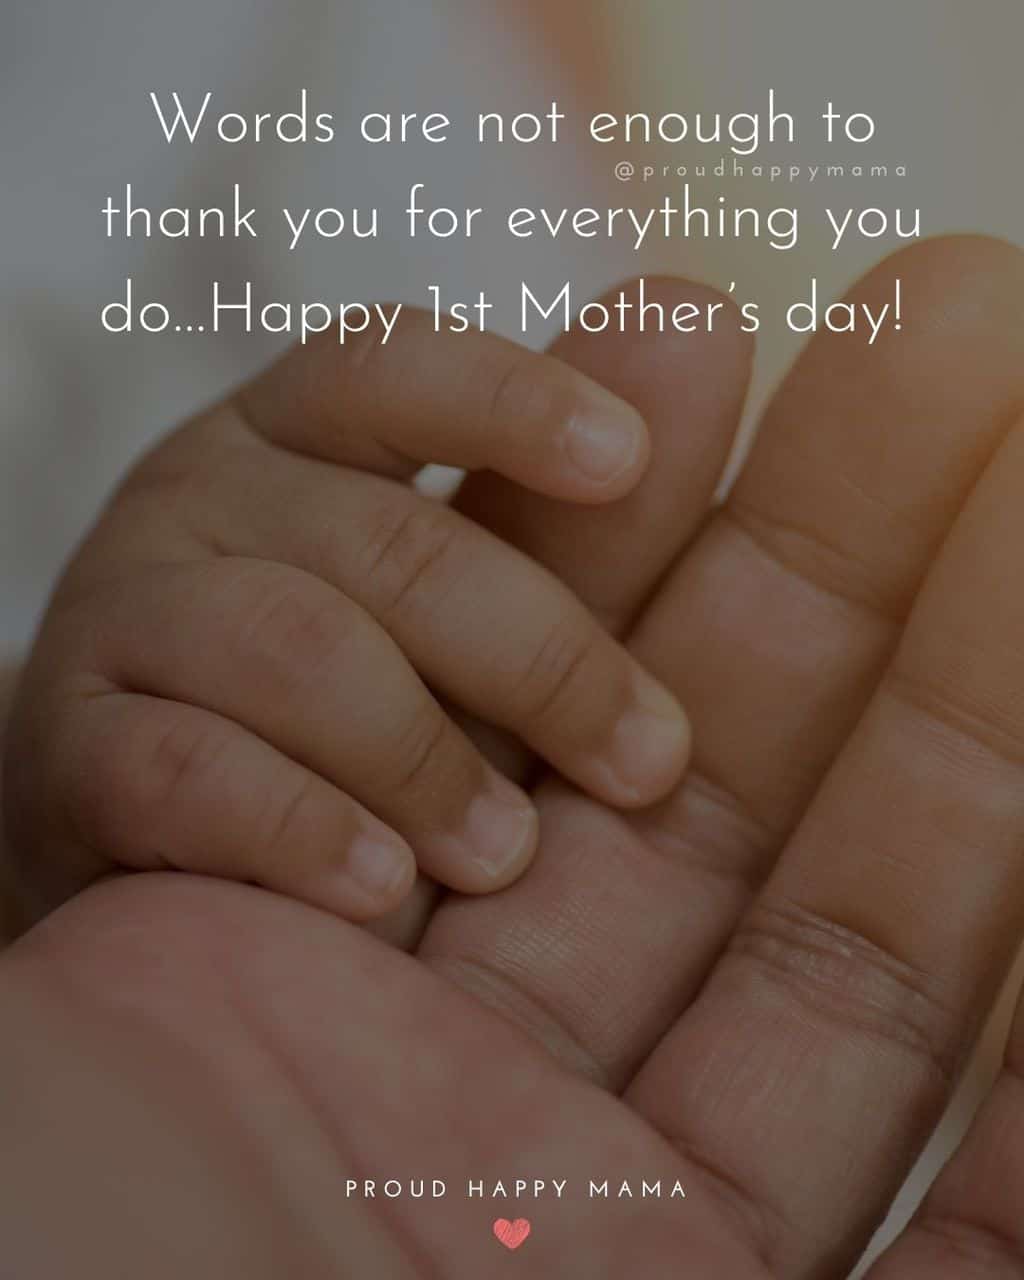 Words are not enough to thank you for everything you do…Happy 1st Mothers day